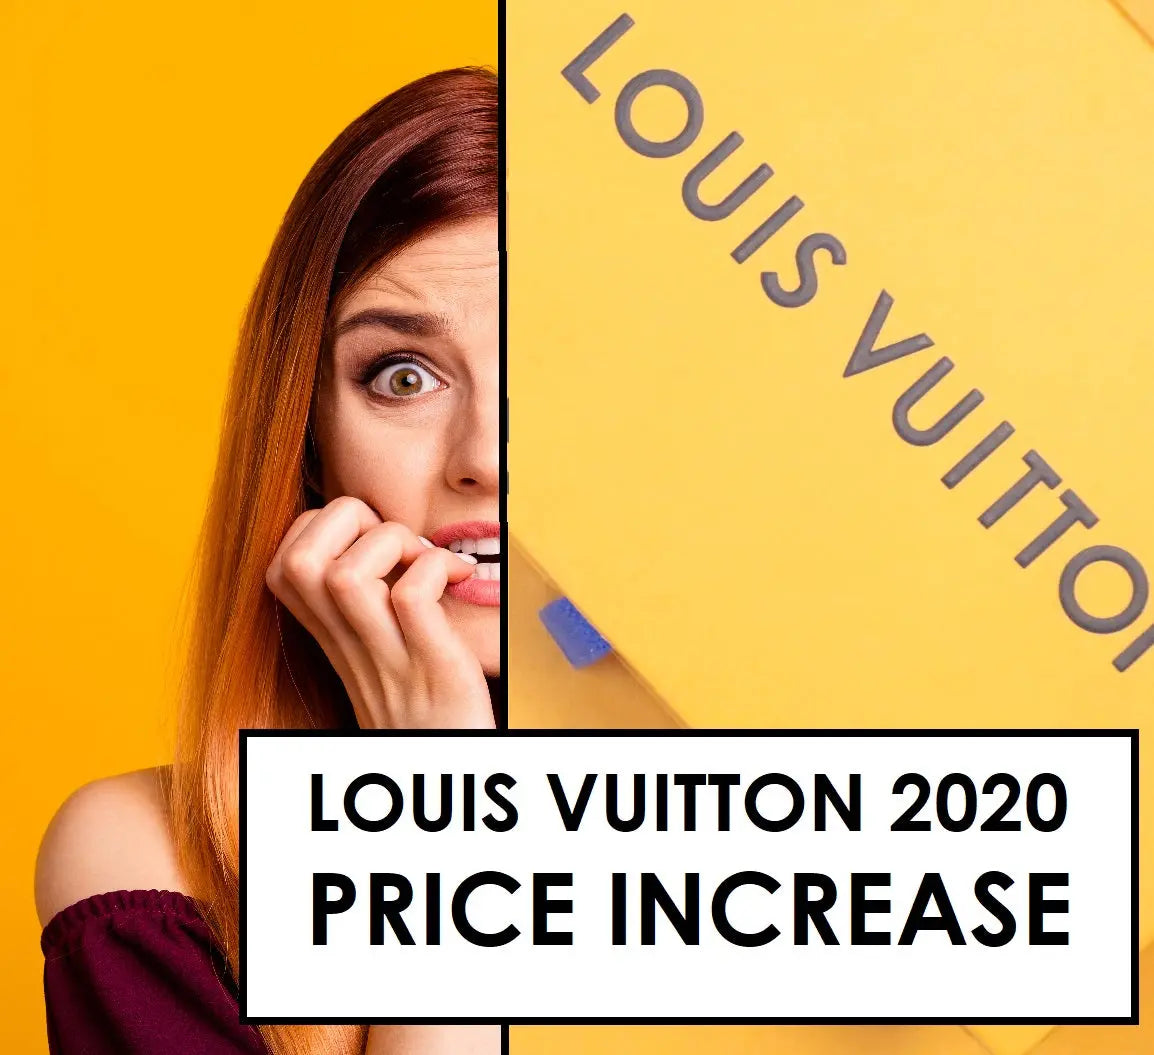 Louis Vuitton Increases Prices in the USA in May 2020 Despite Pandemic